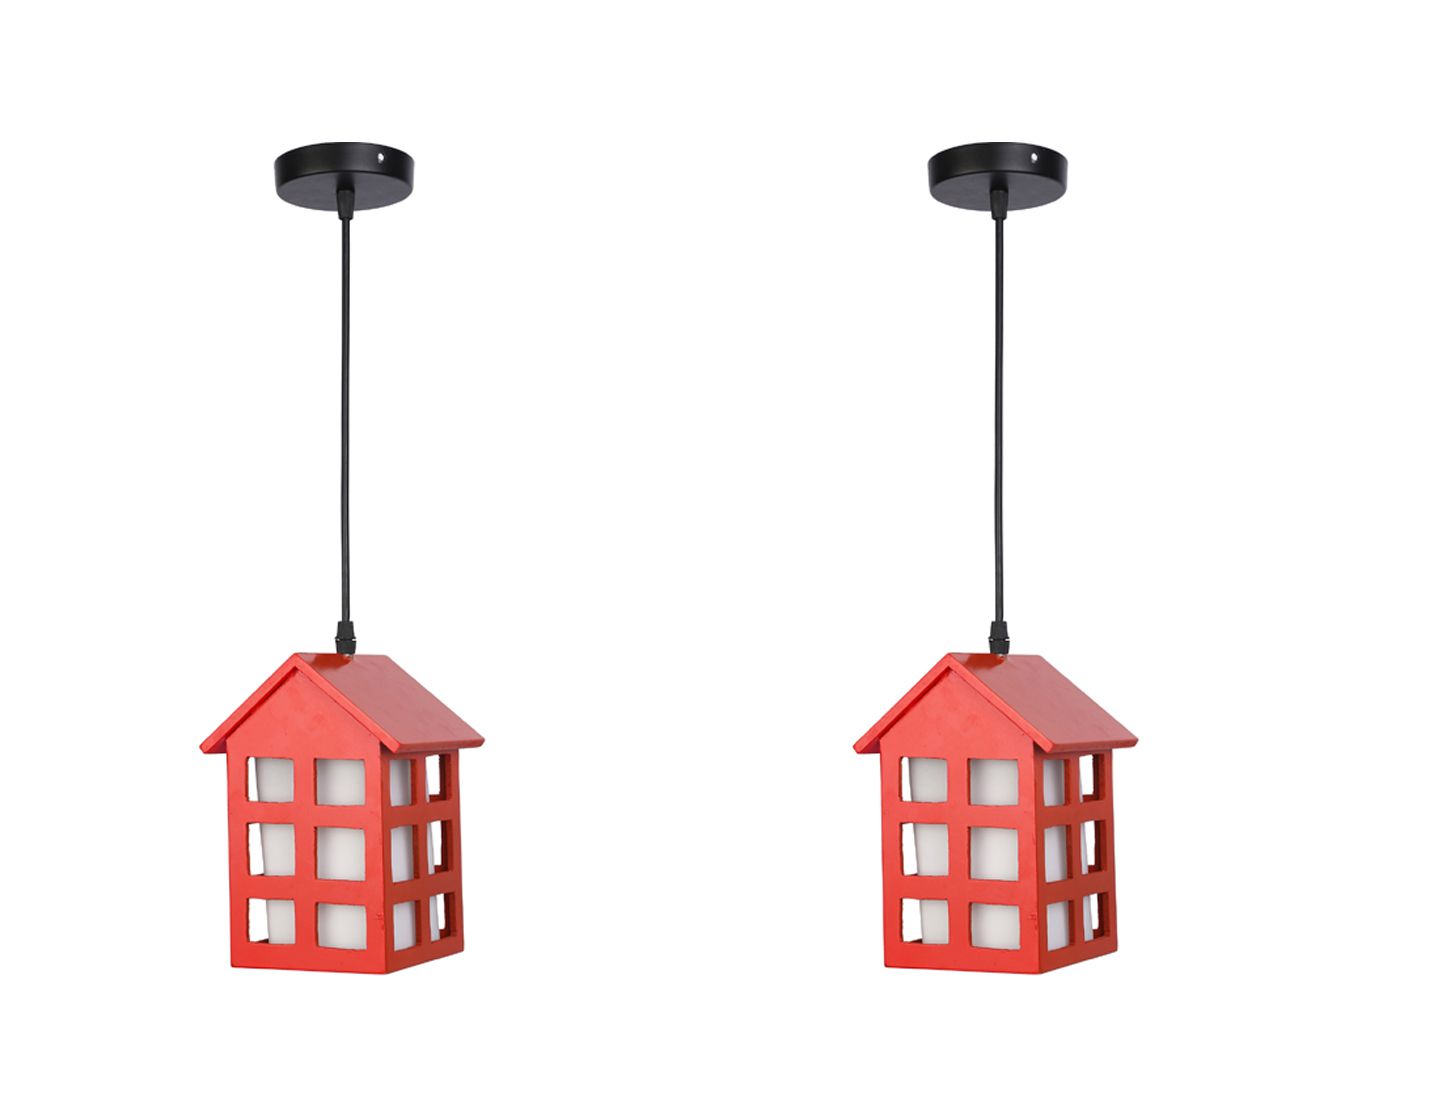     			Somil Wood Hanging Lamp Pendant Red - Pack of 2